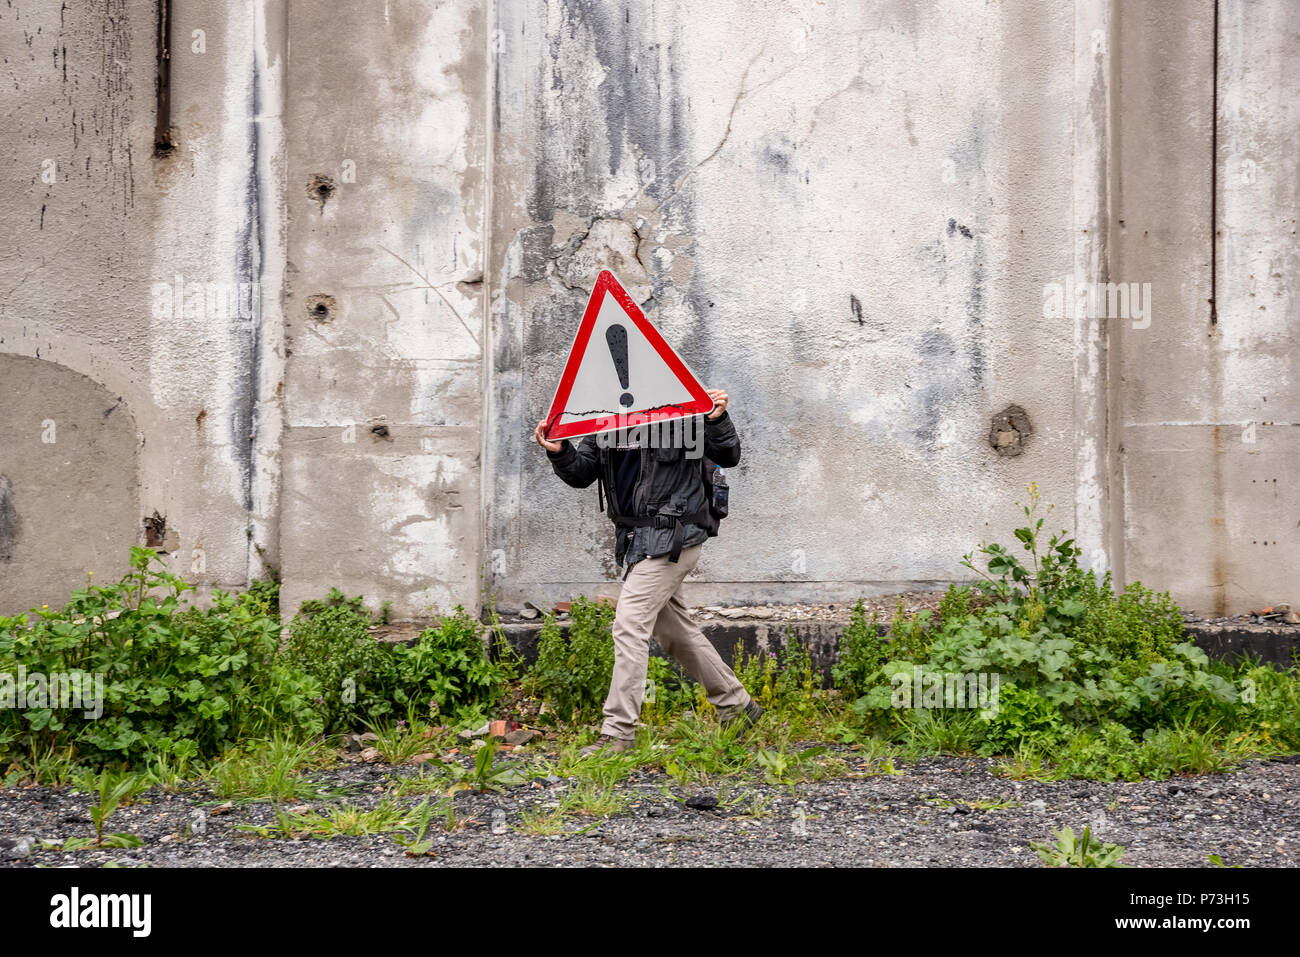 Unidentified man holds a red traffic triangle warning sign in front of his head near a ruined building. Stock Photo